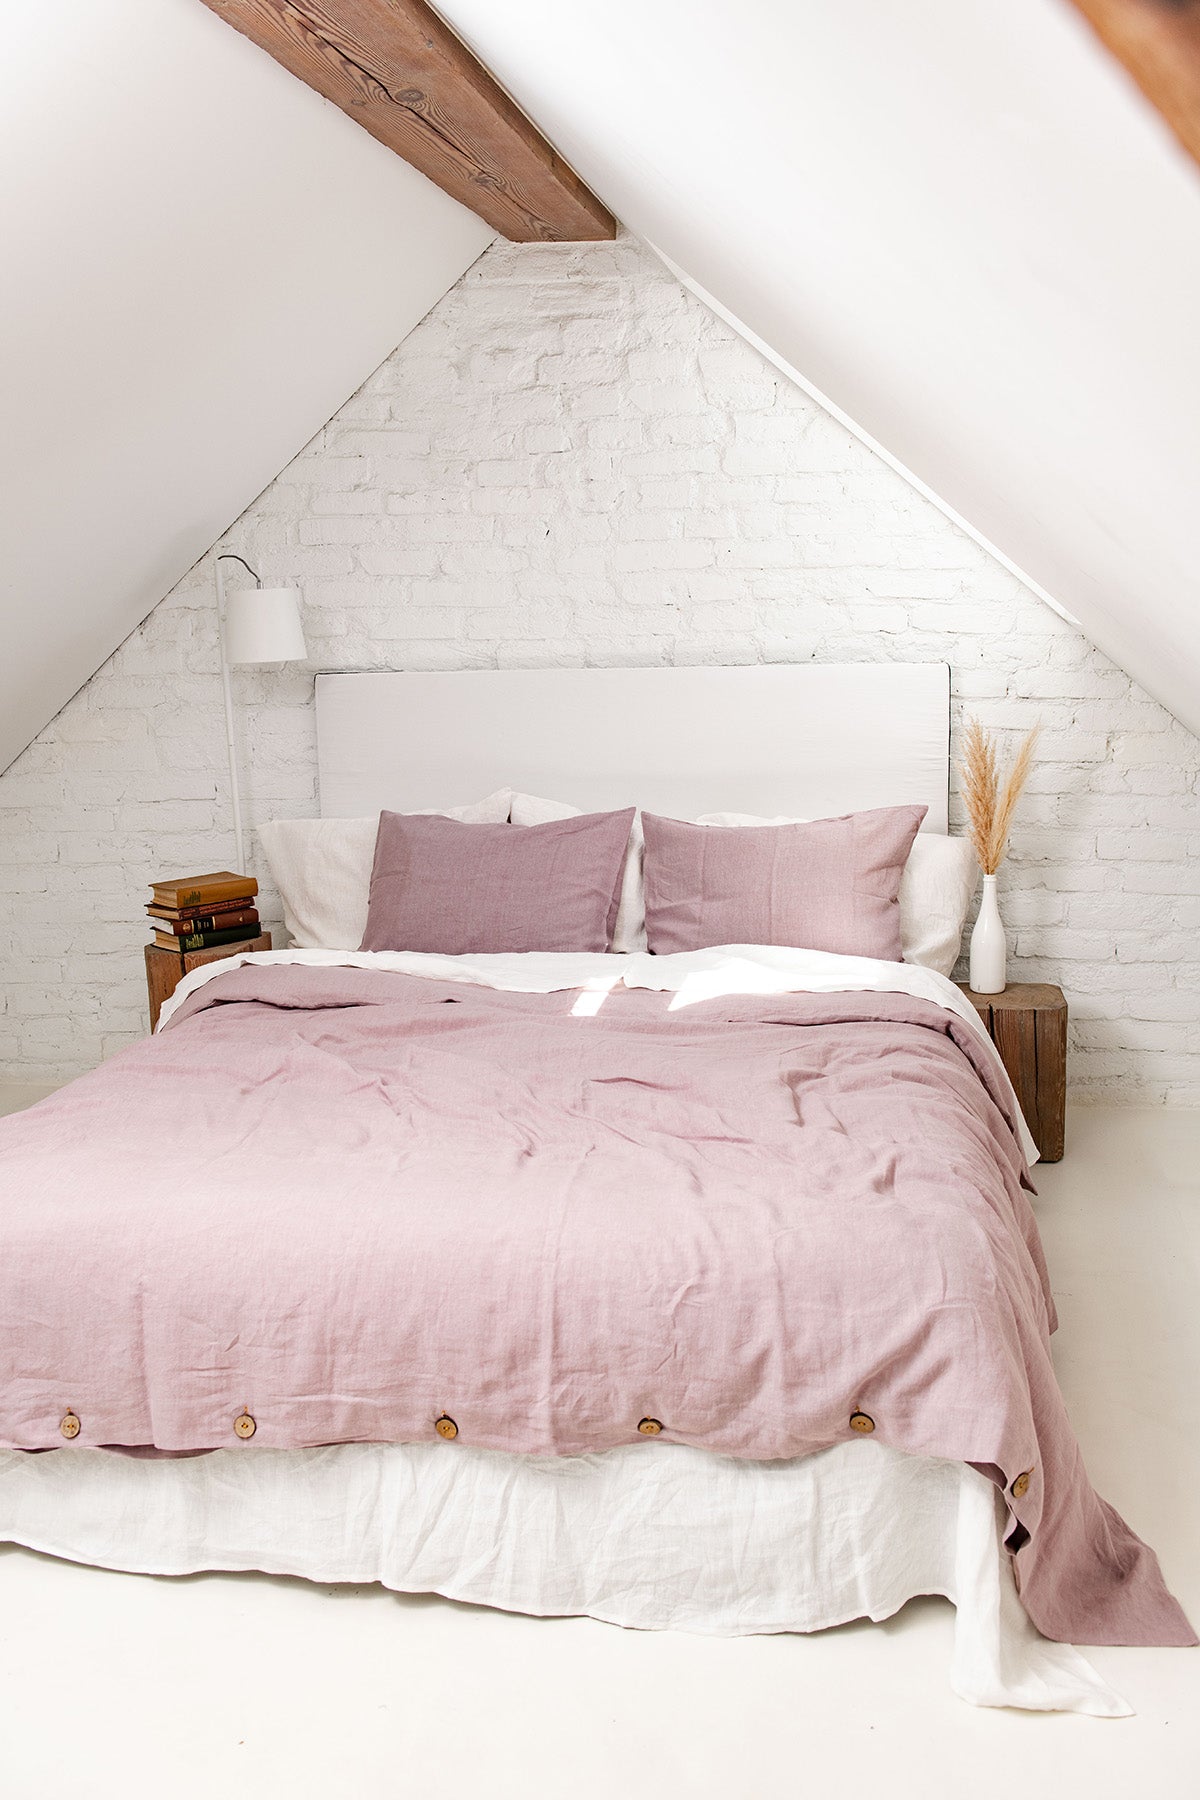 Bed With Dusty Rose Linen Duvet Cover By AmourlInen